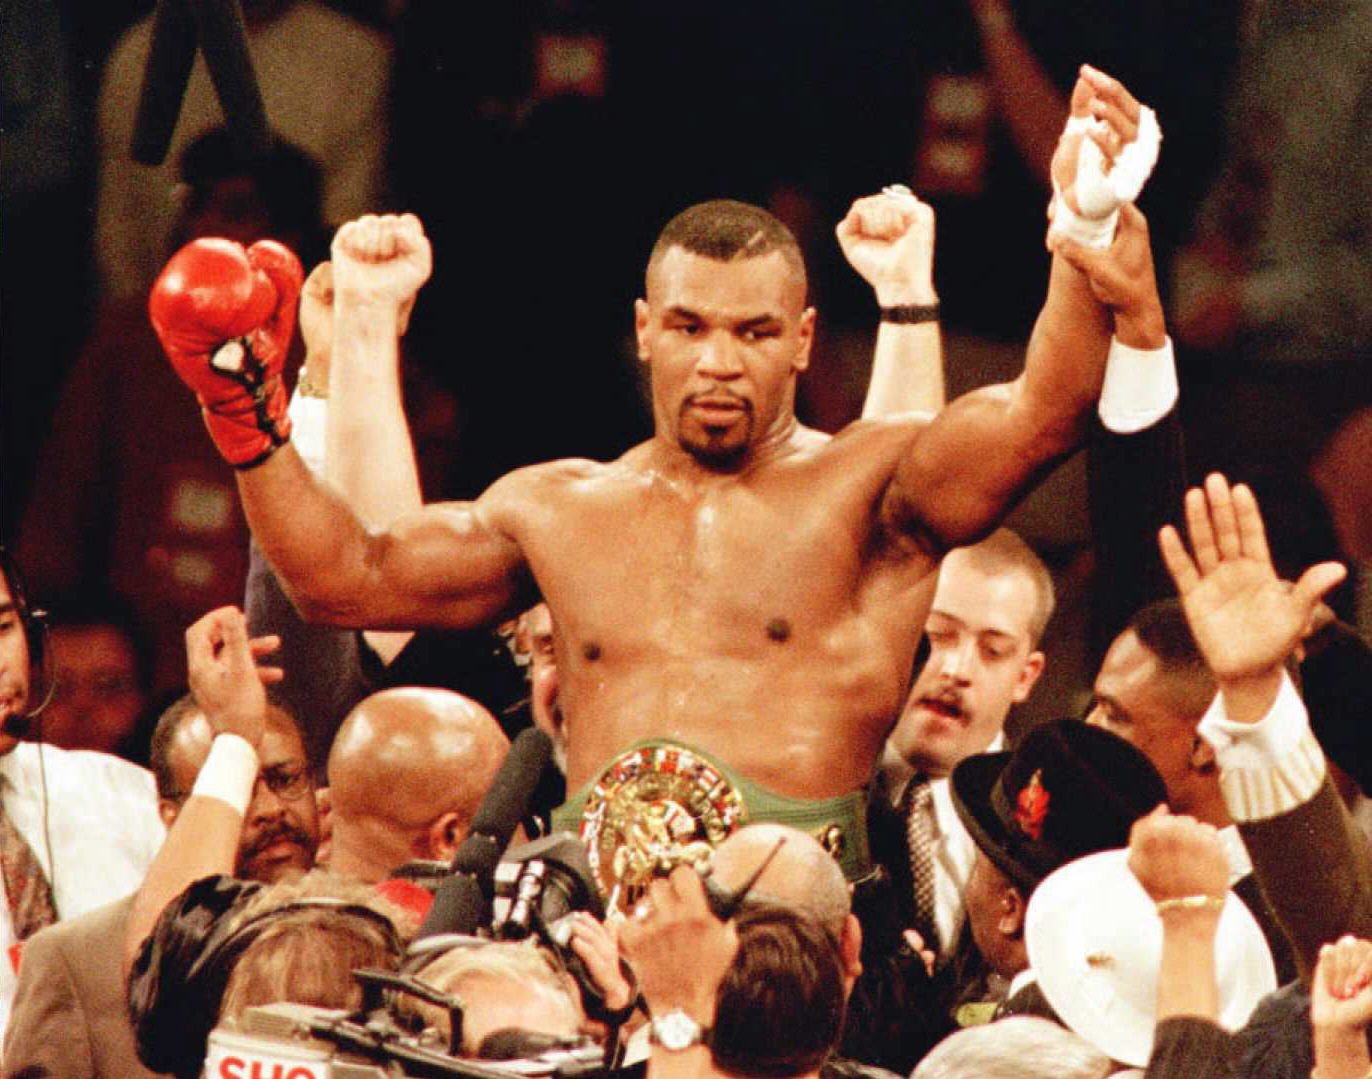 Mike Tyson is lifted into the air wearing the championship belt after defeating WBC heavyweight champion Frank Bruno